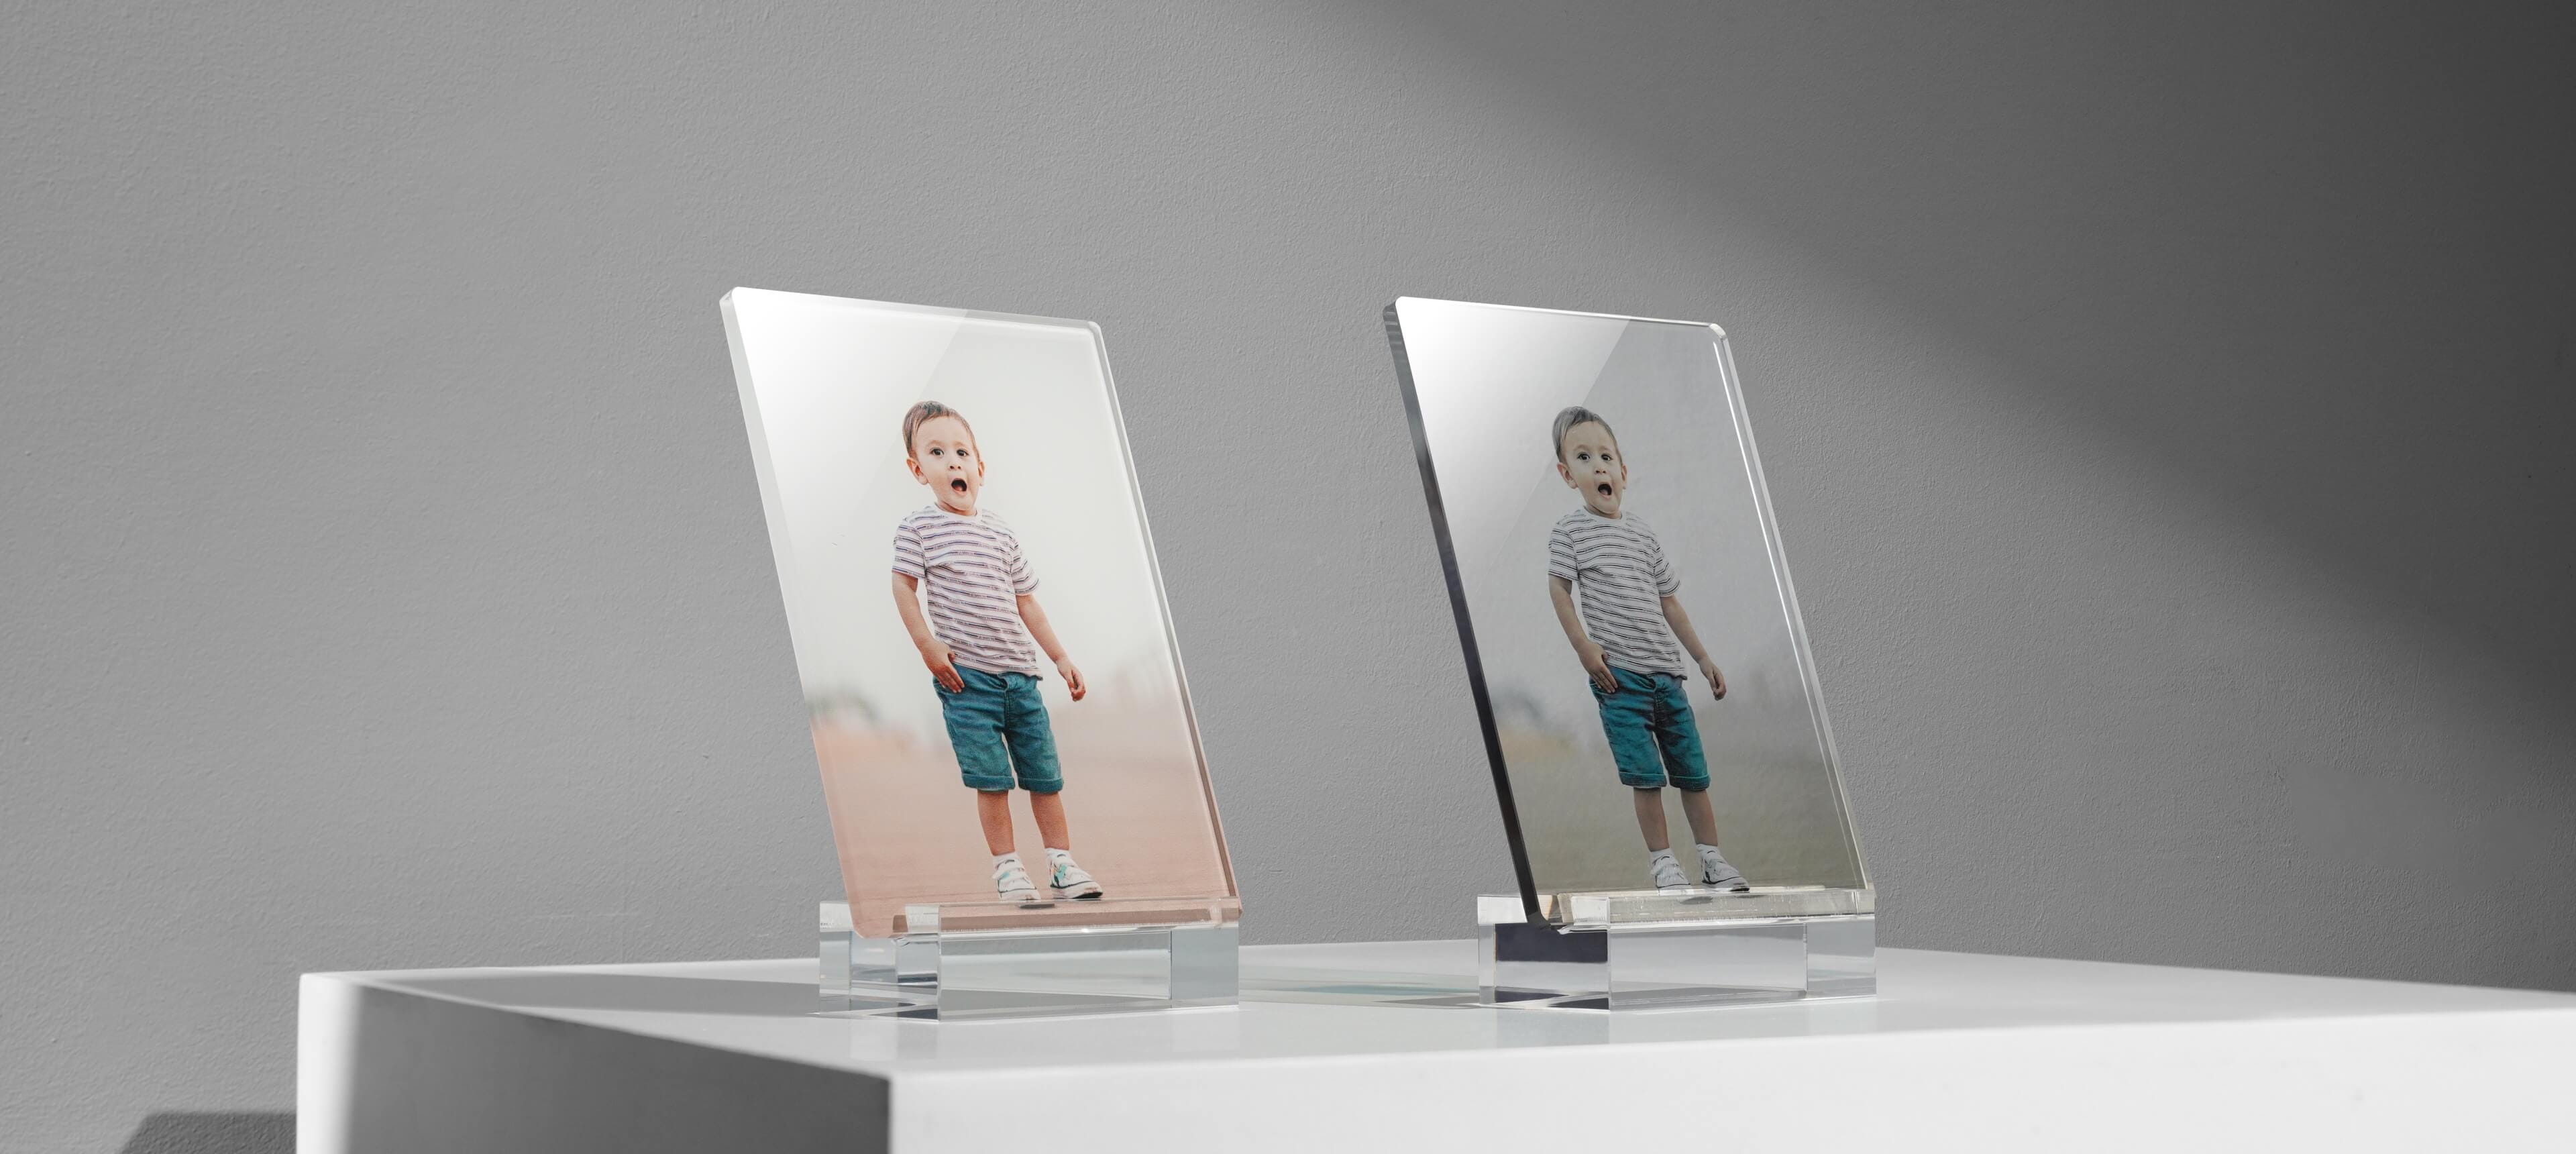 two acrylic photo stands on white table in different image options showing a kid surprised